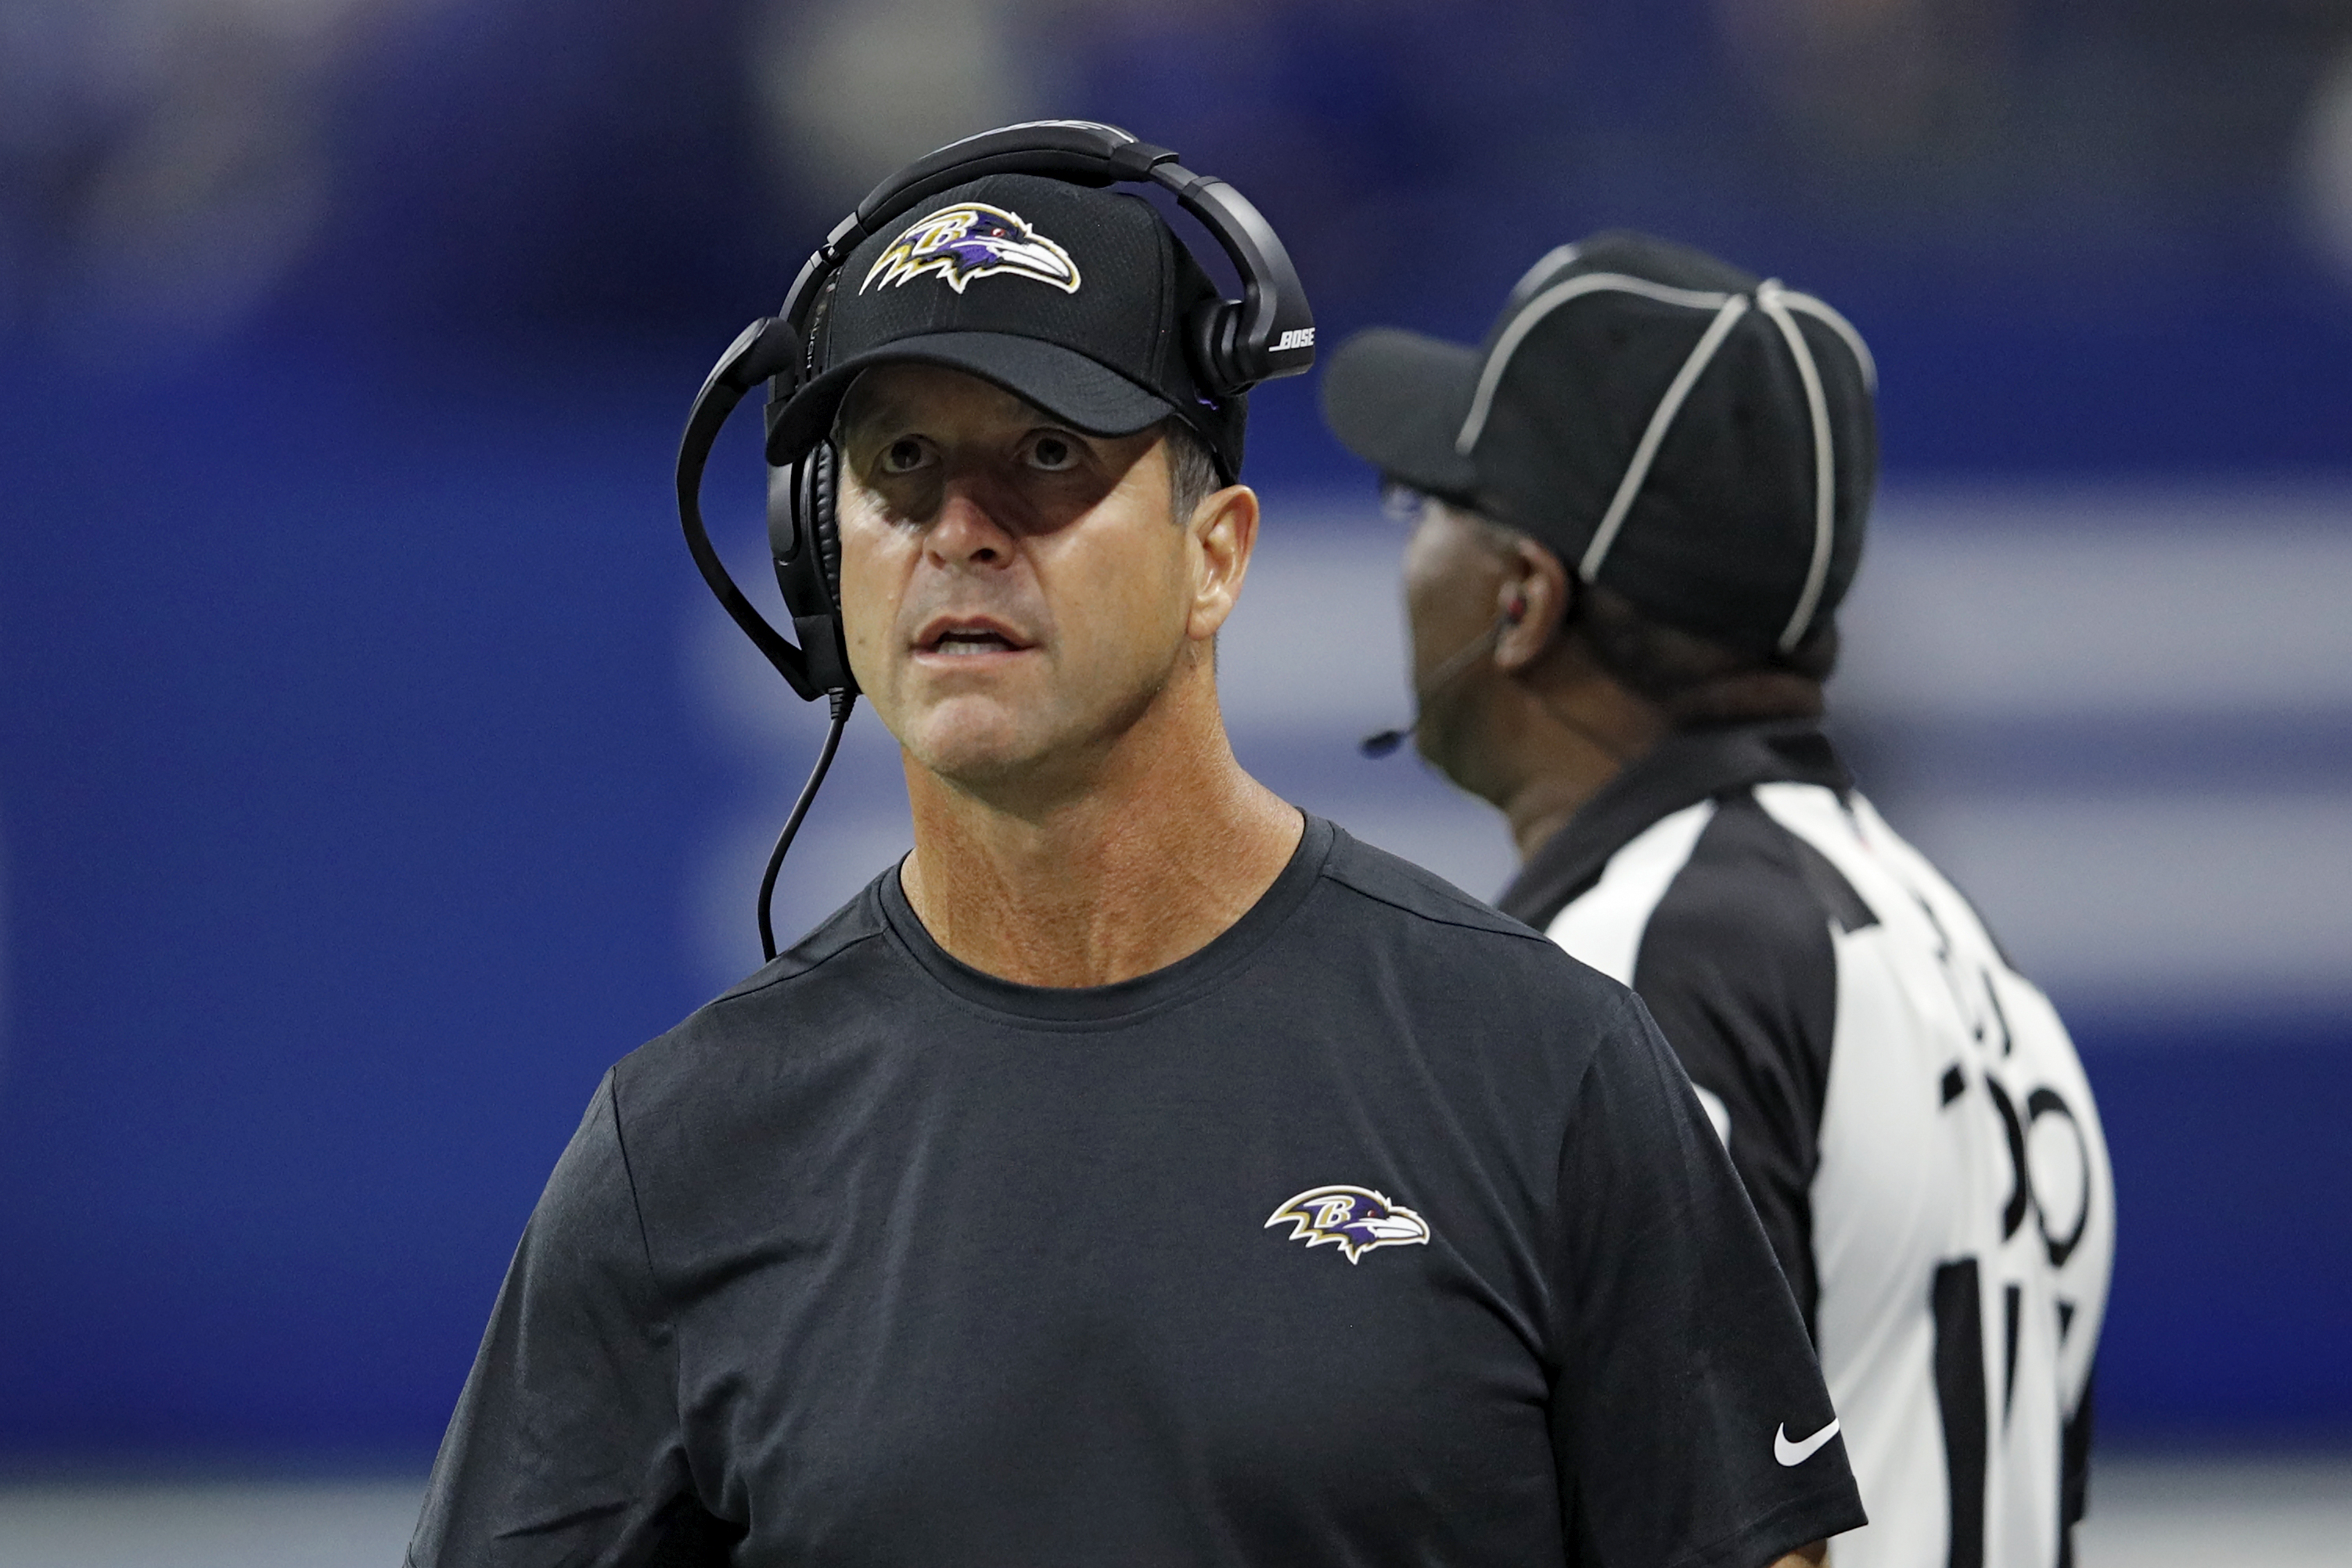 Ravens head coach John Harbaugh on the sideline against the Colts